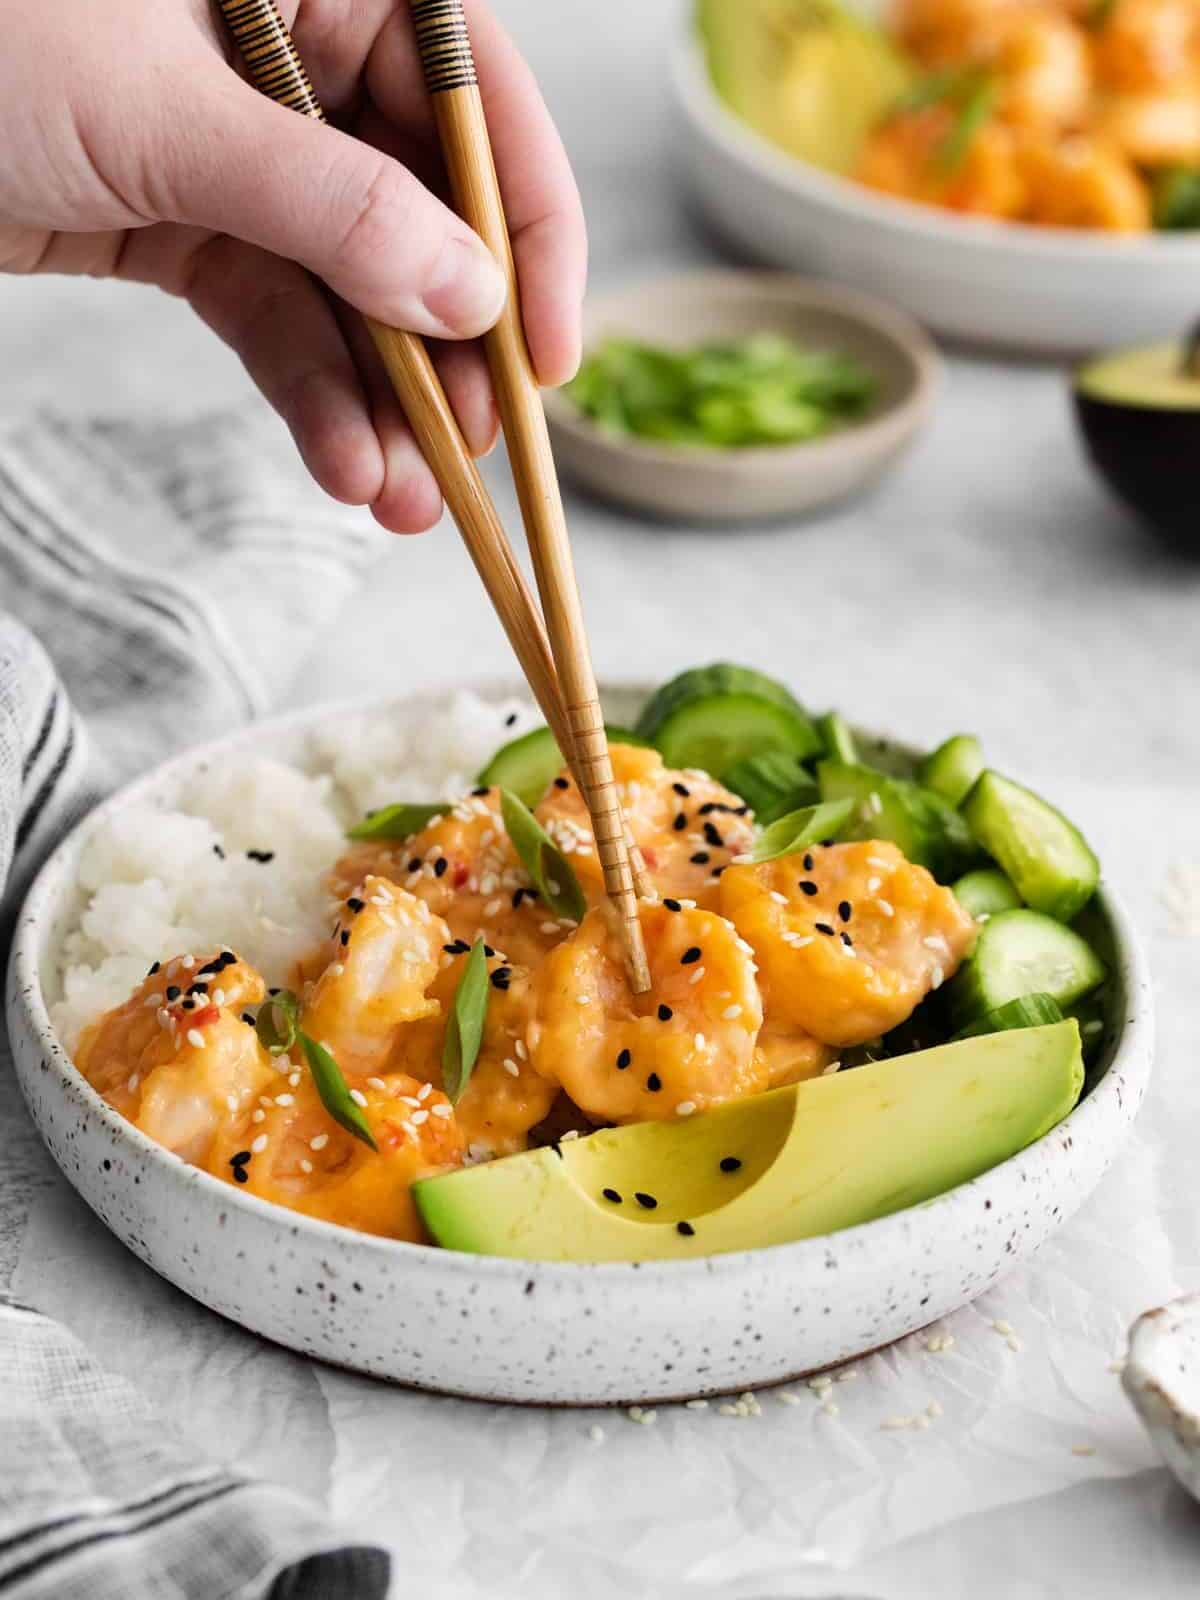 a hand using chopsticks to grab a shrimp from a sushi rice bowl.